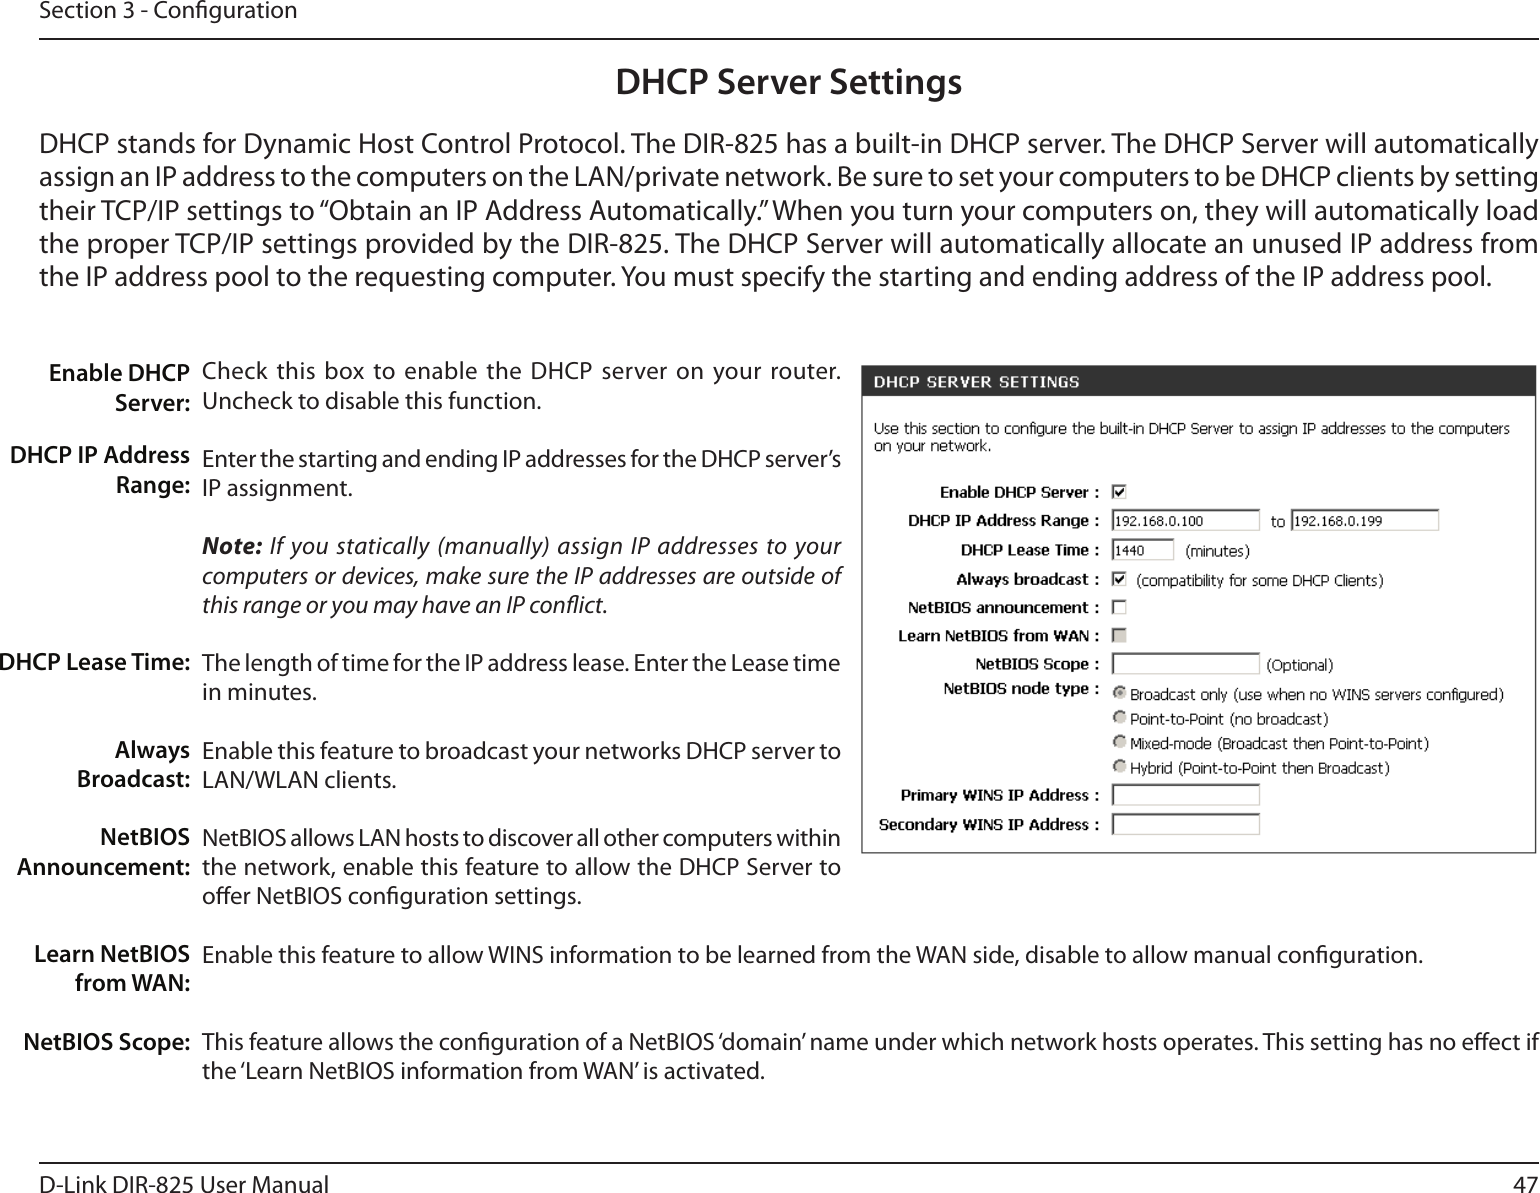 47D-Link DIR-825 User ManualSection 3 - CongurationDHCP Server SettingsDHCP stands for Dynamic Host Control Protocol. The DIR-825 has a built-in DHCP server. The DHCP Server will automatically assign an IP address to the computers on the LAN/private network. Be sure to set your computers to be DHCP clients by setting their TCP/IP settings to “Obtain an IP Address Automatically.” When you turn your computers on, they will automatically load the proper TCP/IP settings provided by the DIR-825. The DHCP Server will automatically allocate an unused IP address from the IP address pool to the requesting computer. You must specify the starting and ending address of the IP address pool.Check this  box to enable  the DHCP  server on your router. Uncheck to disable this function.Enter the starting and ending IP addresses for the DHCP server’s IP assignment.Note: If you statically (manually) assign IP addresses to your computers or devices, make sure the IP addresses are outside of this range or you may have an IP conict. The length of time for the IP address lease. Enter the Lease time in minutes.Enable this feature to broadcast your networks DHCP server to LAN/WLAN clients.NetBIOS allows LAN hosts to discover all other computers within the network, enable this feature to allow the DHCP Server to oer NetBIOS conguration settings.Enable this feature to allow WINS information to be learned from the WAN side, disable to allow manual conguration.This feature allows the conguration of a NetBIOS ‘domain’ name under which network hosts operates. This setting has no eect if the ‘Learn NetBIOS information from WAN’ is activated.Enable DHCP Server:DHCP IP Address Range:DHCP Lease Time:Always Broadcast:NetBIOS Announcement:Learn NetBIOS from WAN:NetBIOS Scope: